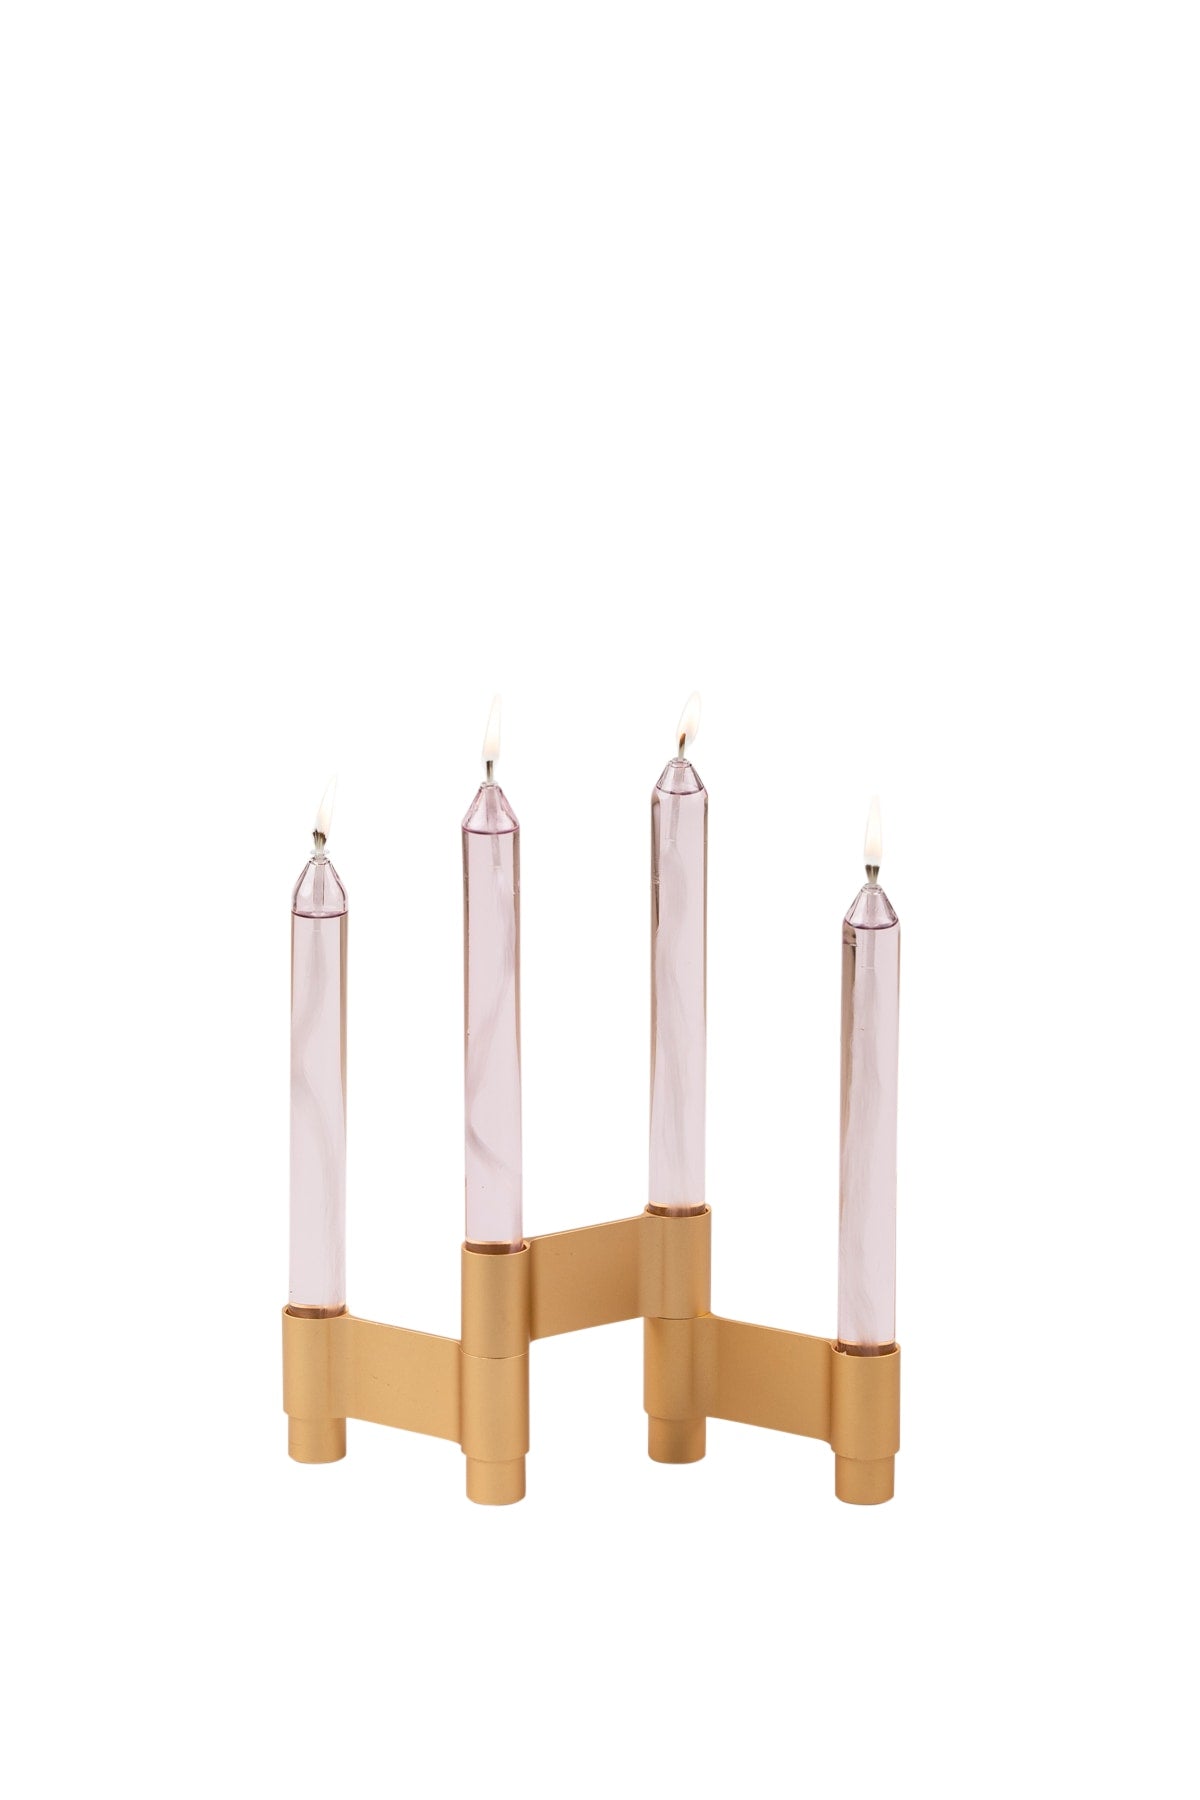 LINK, CANDLE HOLDER, GOLDEN ANODIZED